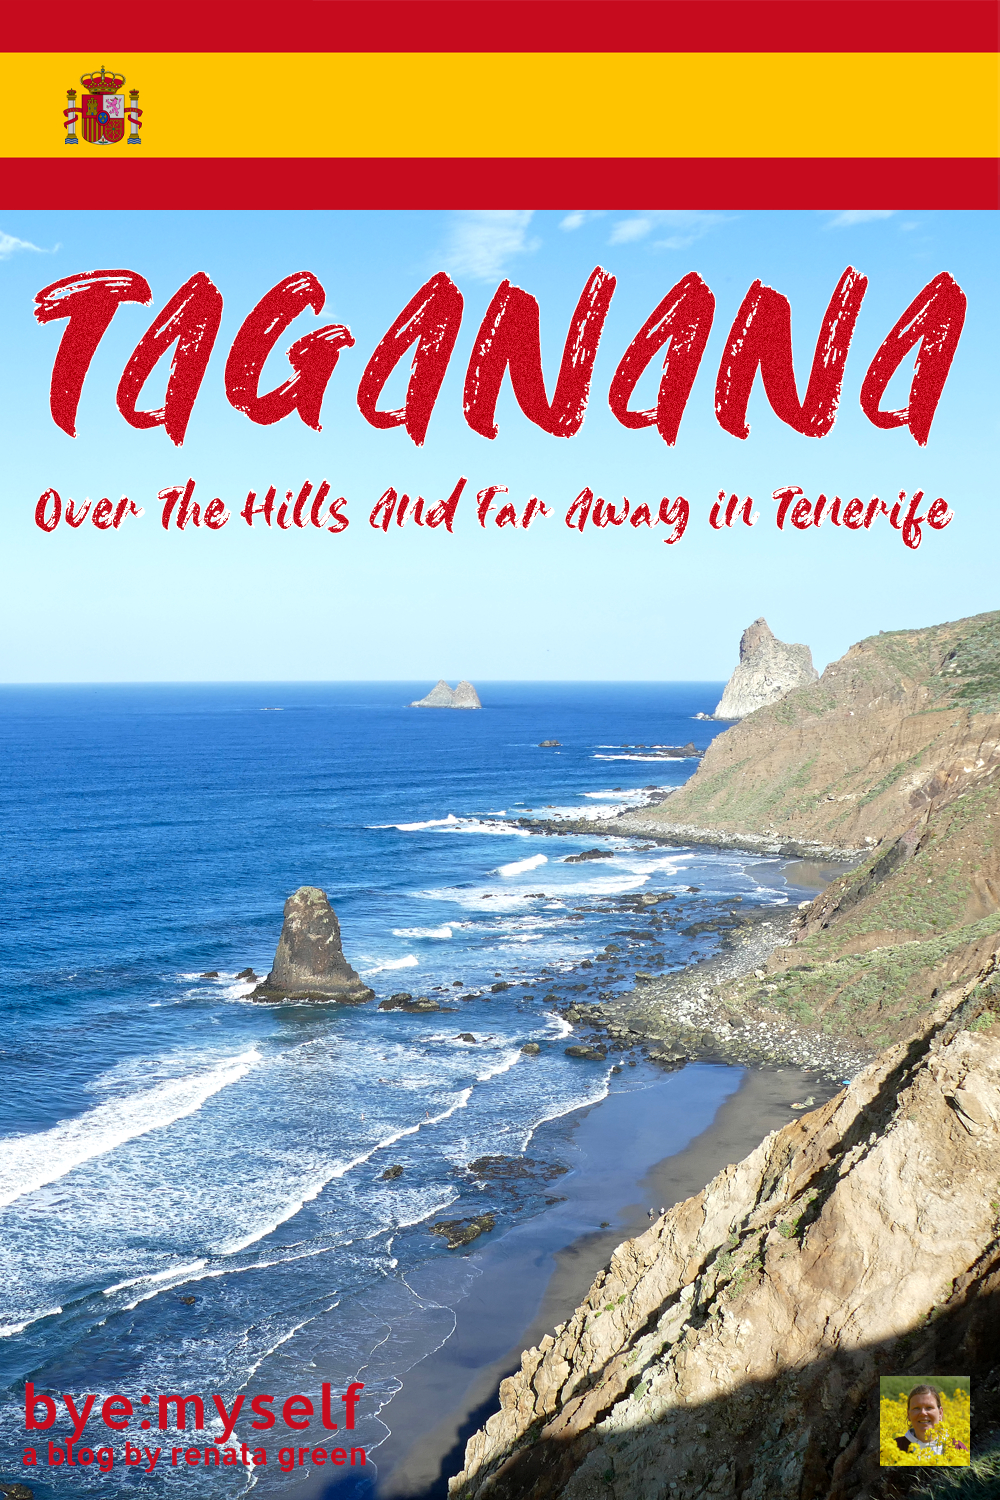 A bit over 20 kilometers north of the capital Santa Cruz, Tenerife hides one of its greatest treasures, namely the mountain village of Taganana, where you get to know another side of the island. So let's go over the hills and far away. #taganana #mountainvillage #anaga #anagaforst #nationalpark #anagaruralpark #unesco #tenerife #canaryislands #spain #hike #beaches #solotravel #byemyself